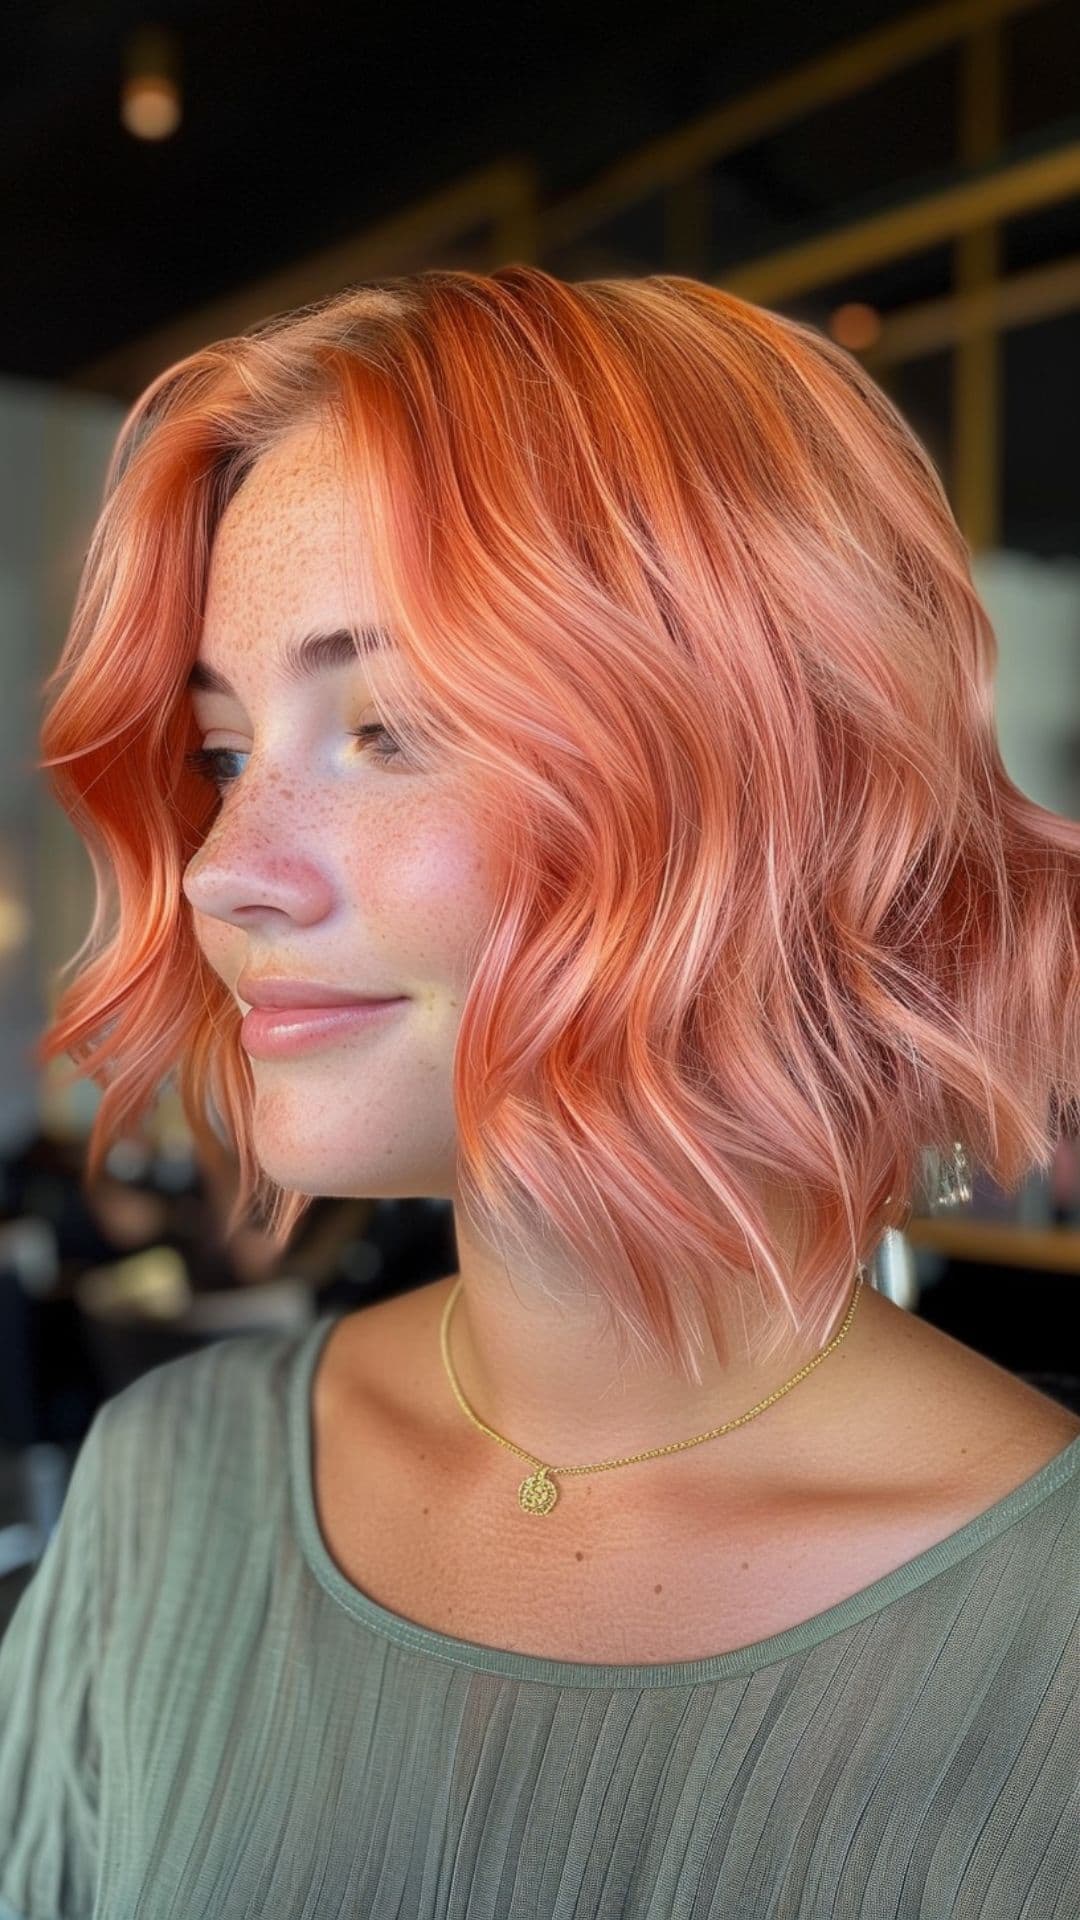 A woman modelling a sunset pink hair.